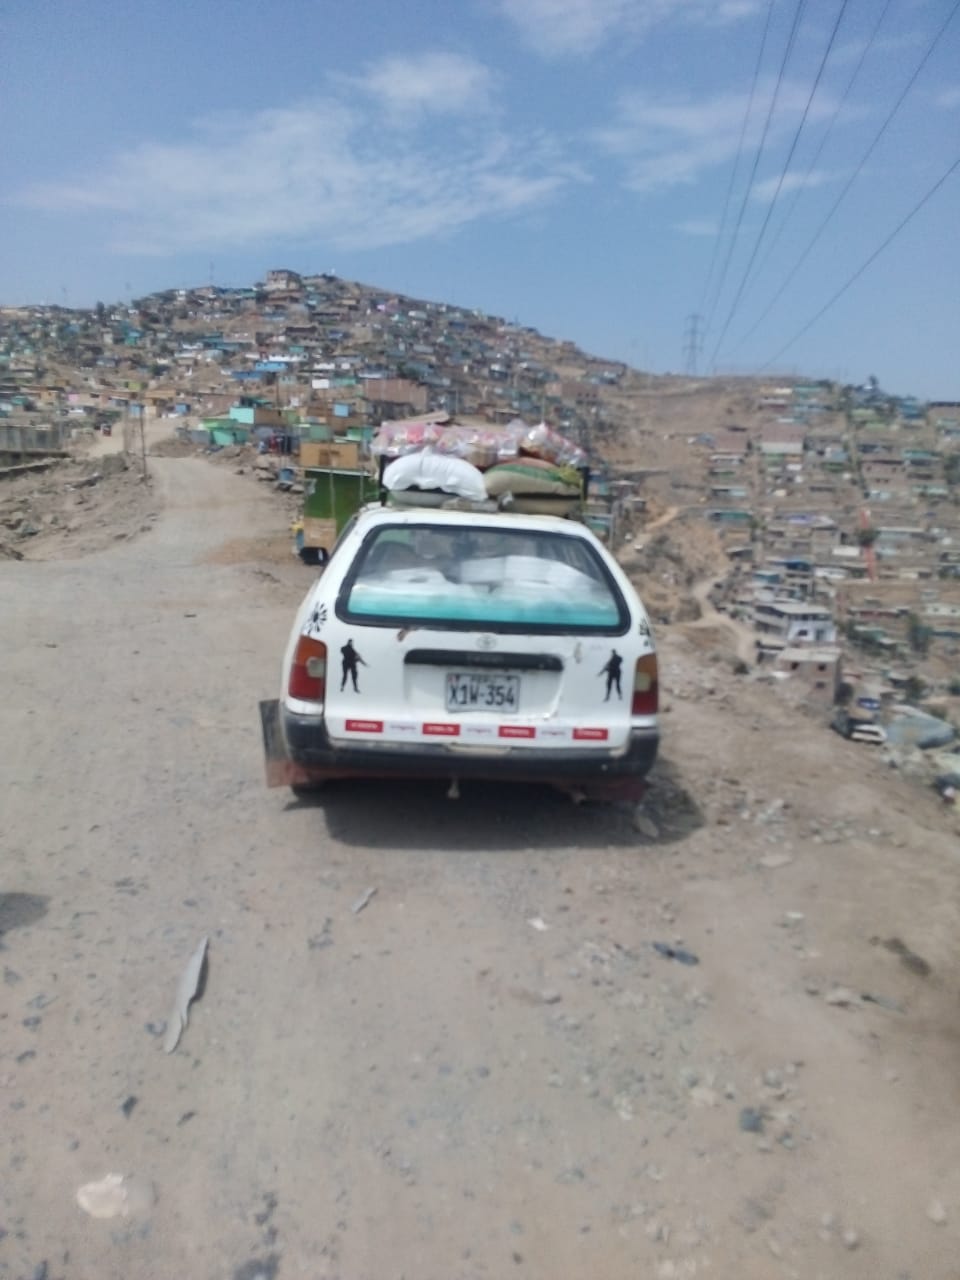 Support from Presbyterians helps get needed food and resources to families on the outskirts of Lima. Homes with no food or money hang white flags from their windows.